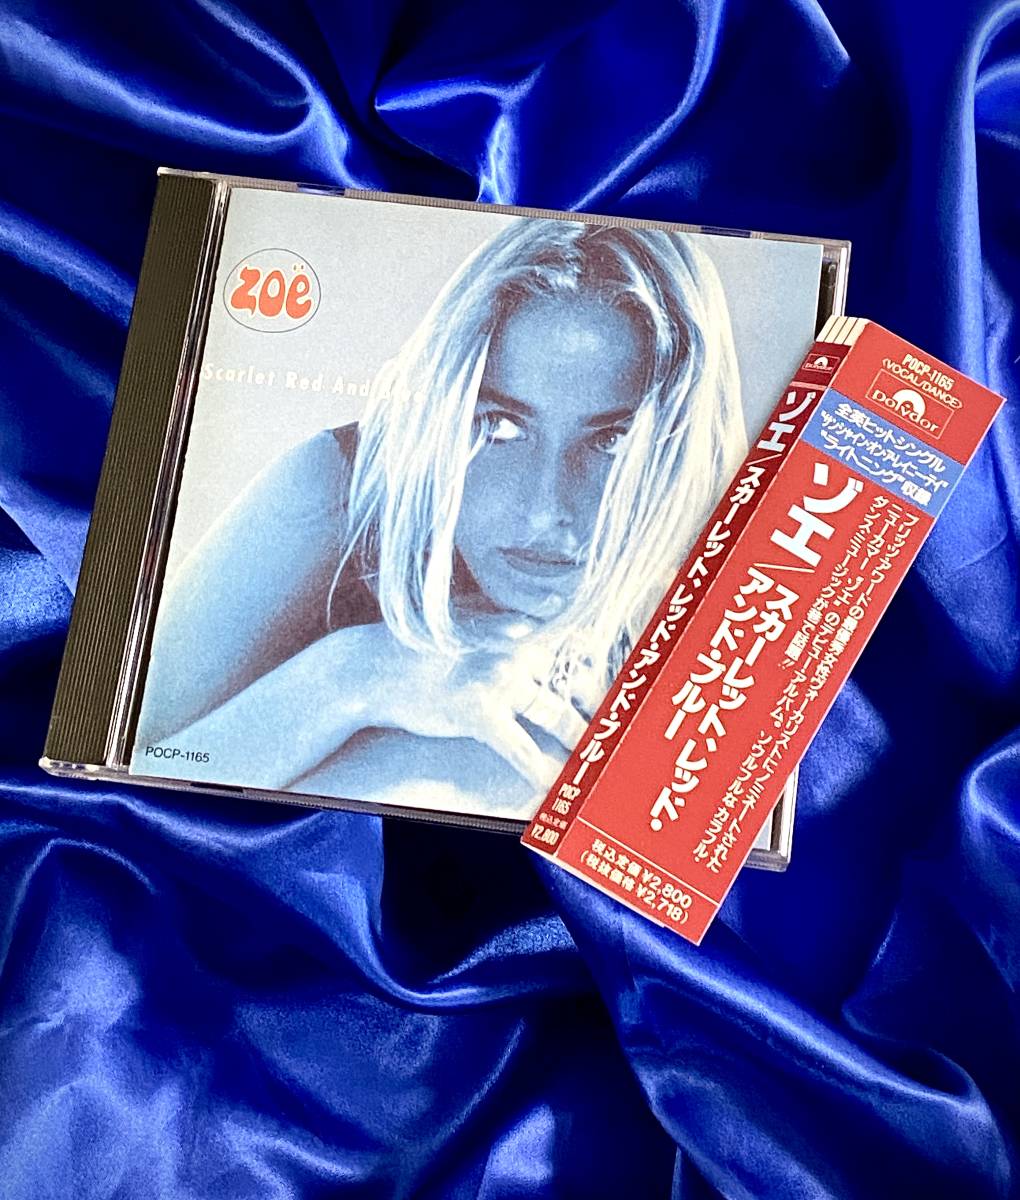 ★Zoe / Scarlet Red And Blue　ゾエ●1992年国内盤POCP-1165　帯付き完品_画像1